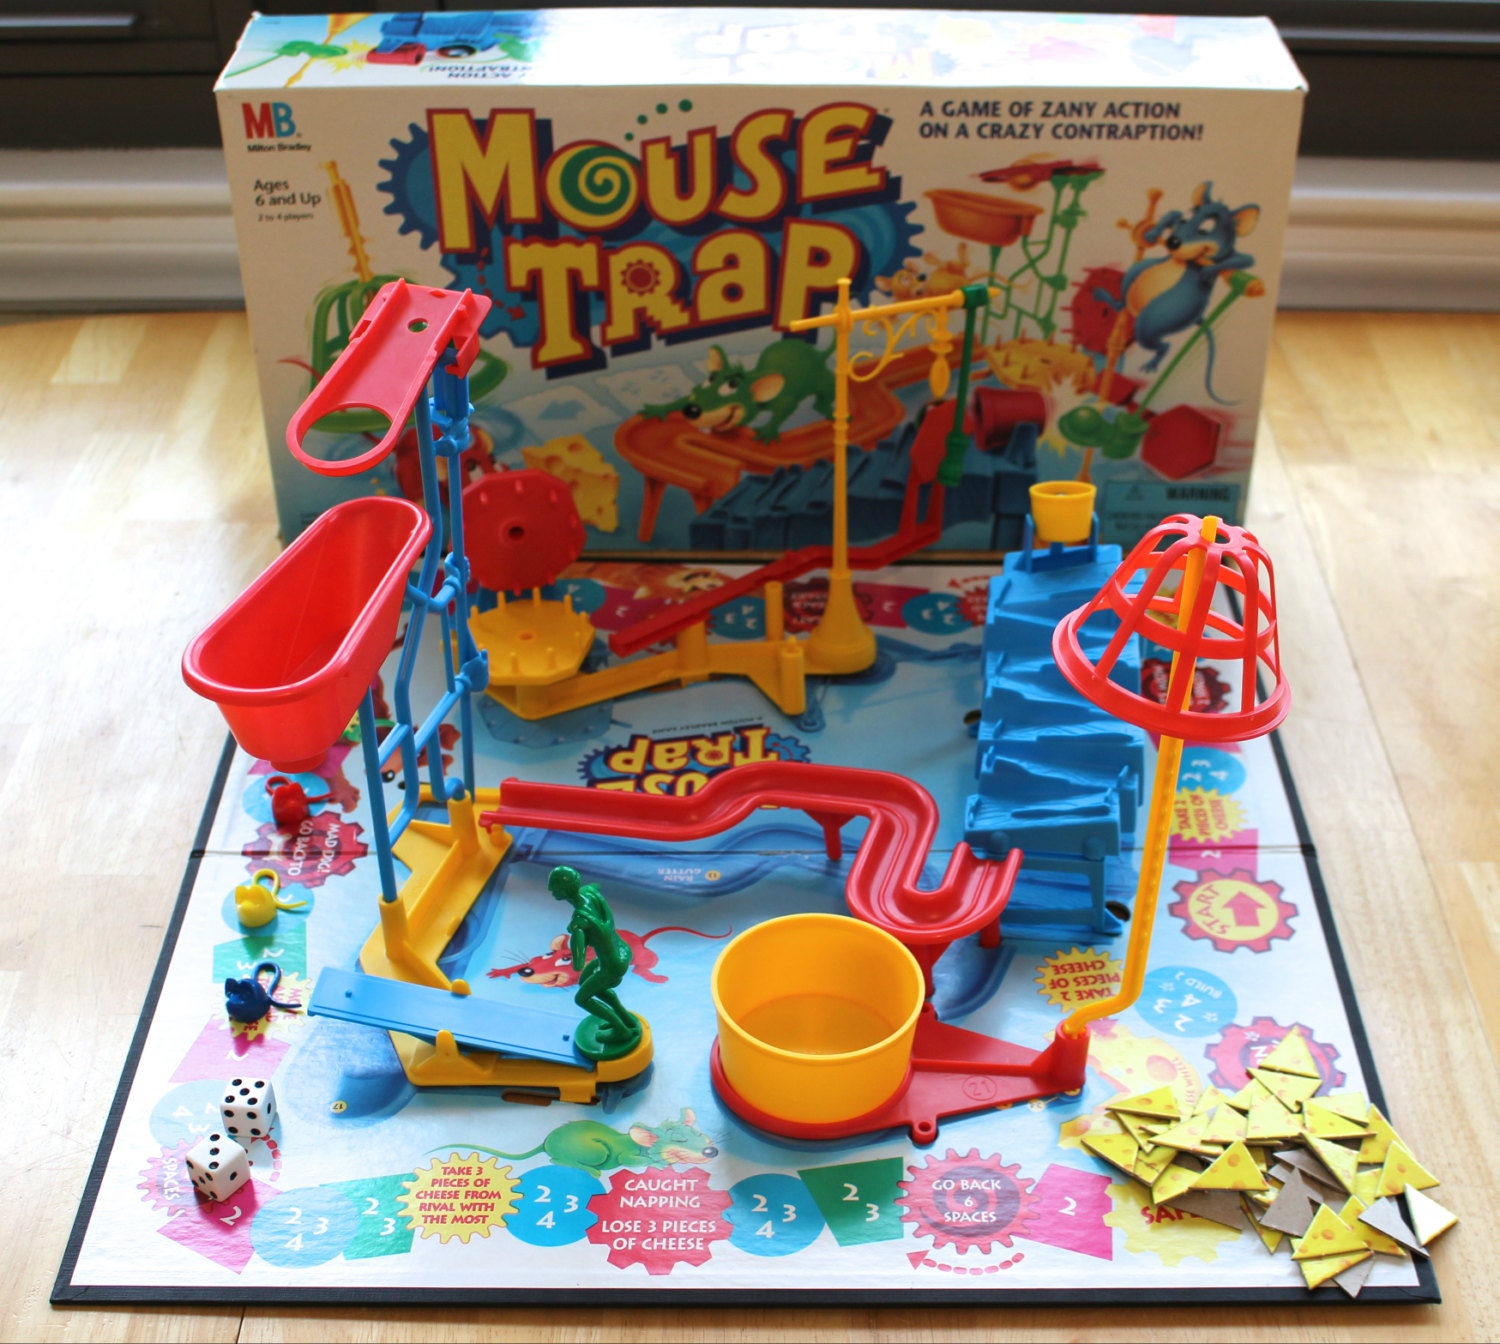 PDF Mouse Trap Game Rules And Instructions - cirasong